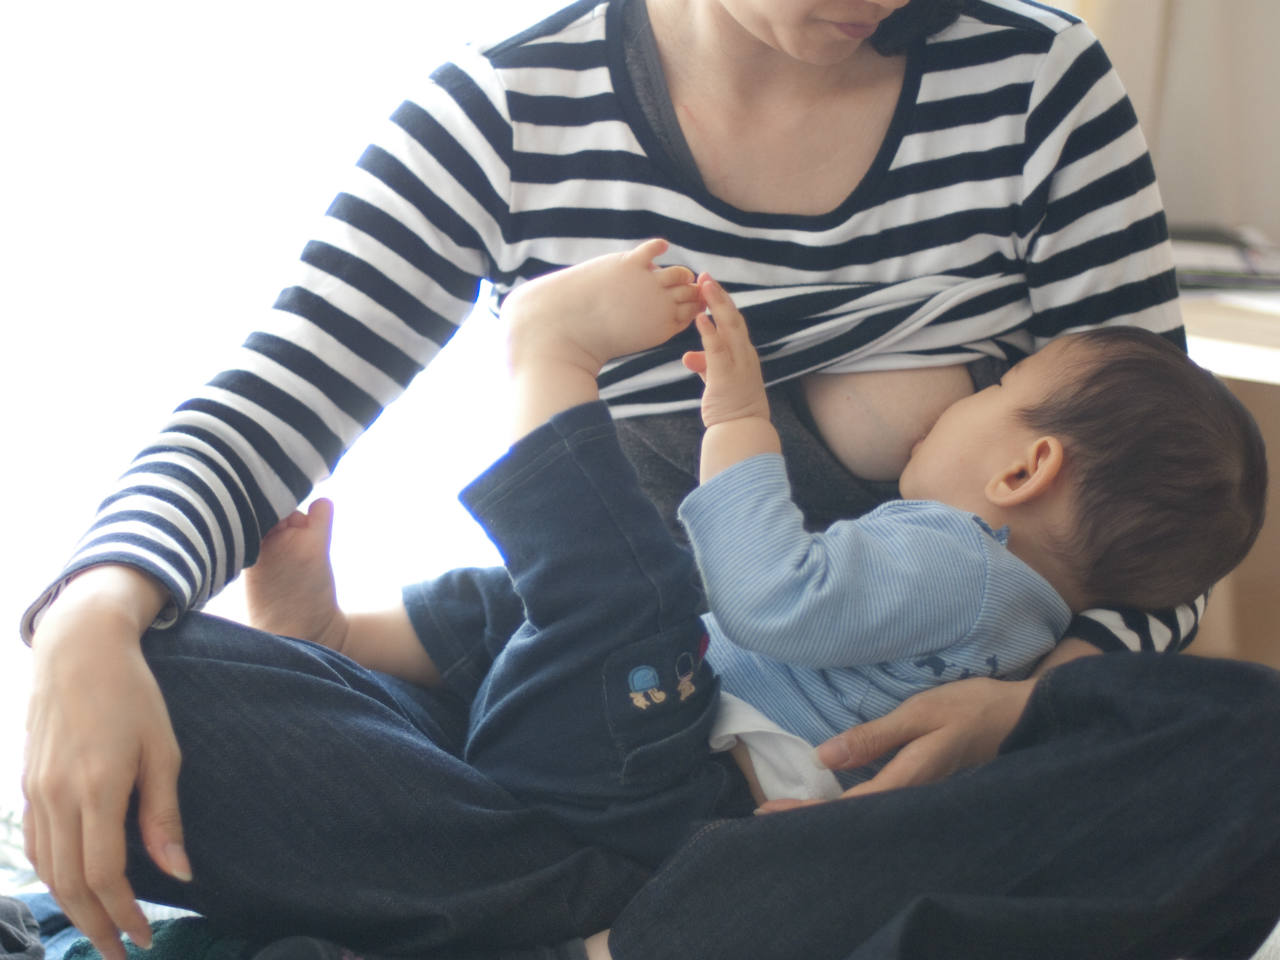 Can you start breastfeeding after stopping? Our lactation expert weighs in.